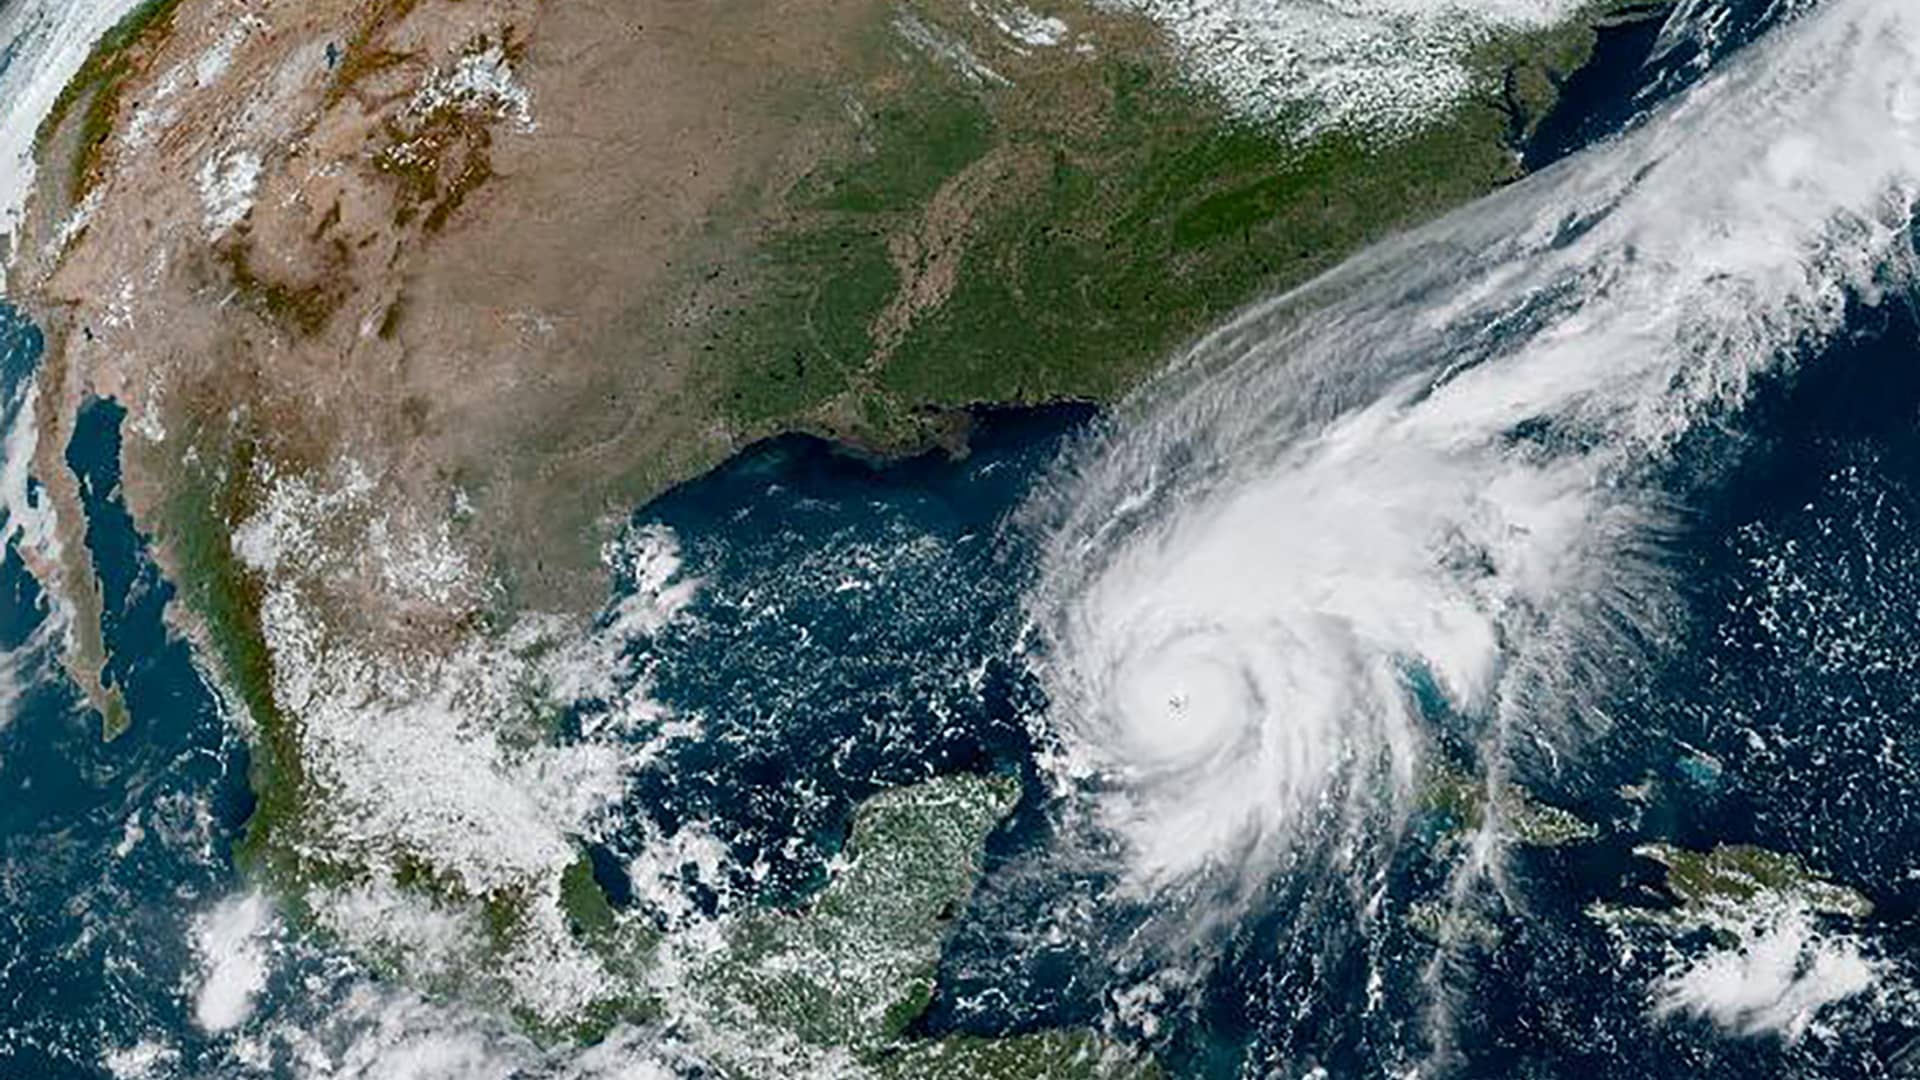 Hurricane Ian makes its way to Florida's west coast after passing Cuba in a composite image from the National Oceanic and Atmospheric Administration (NOAA) GOES-East weather satellite September 27, 2022.